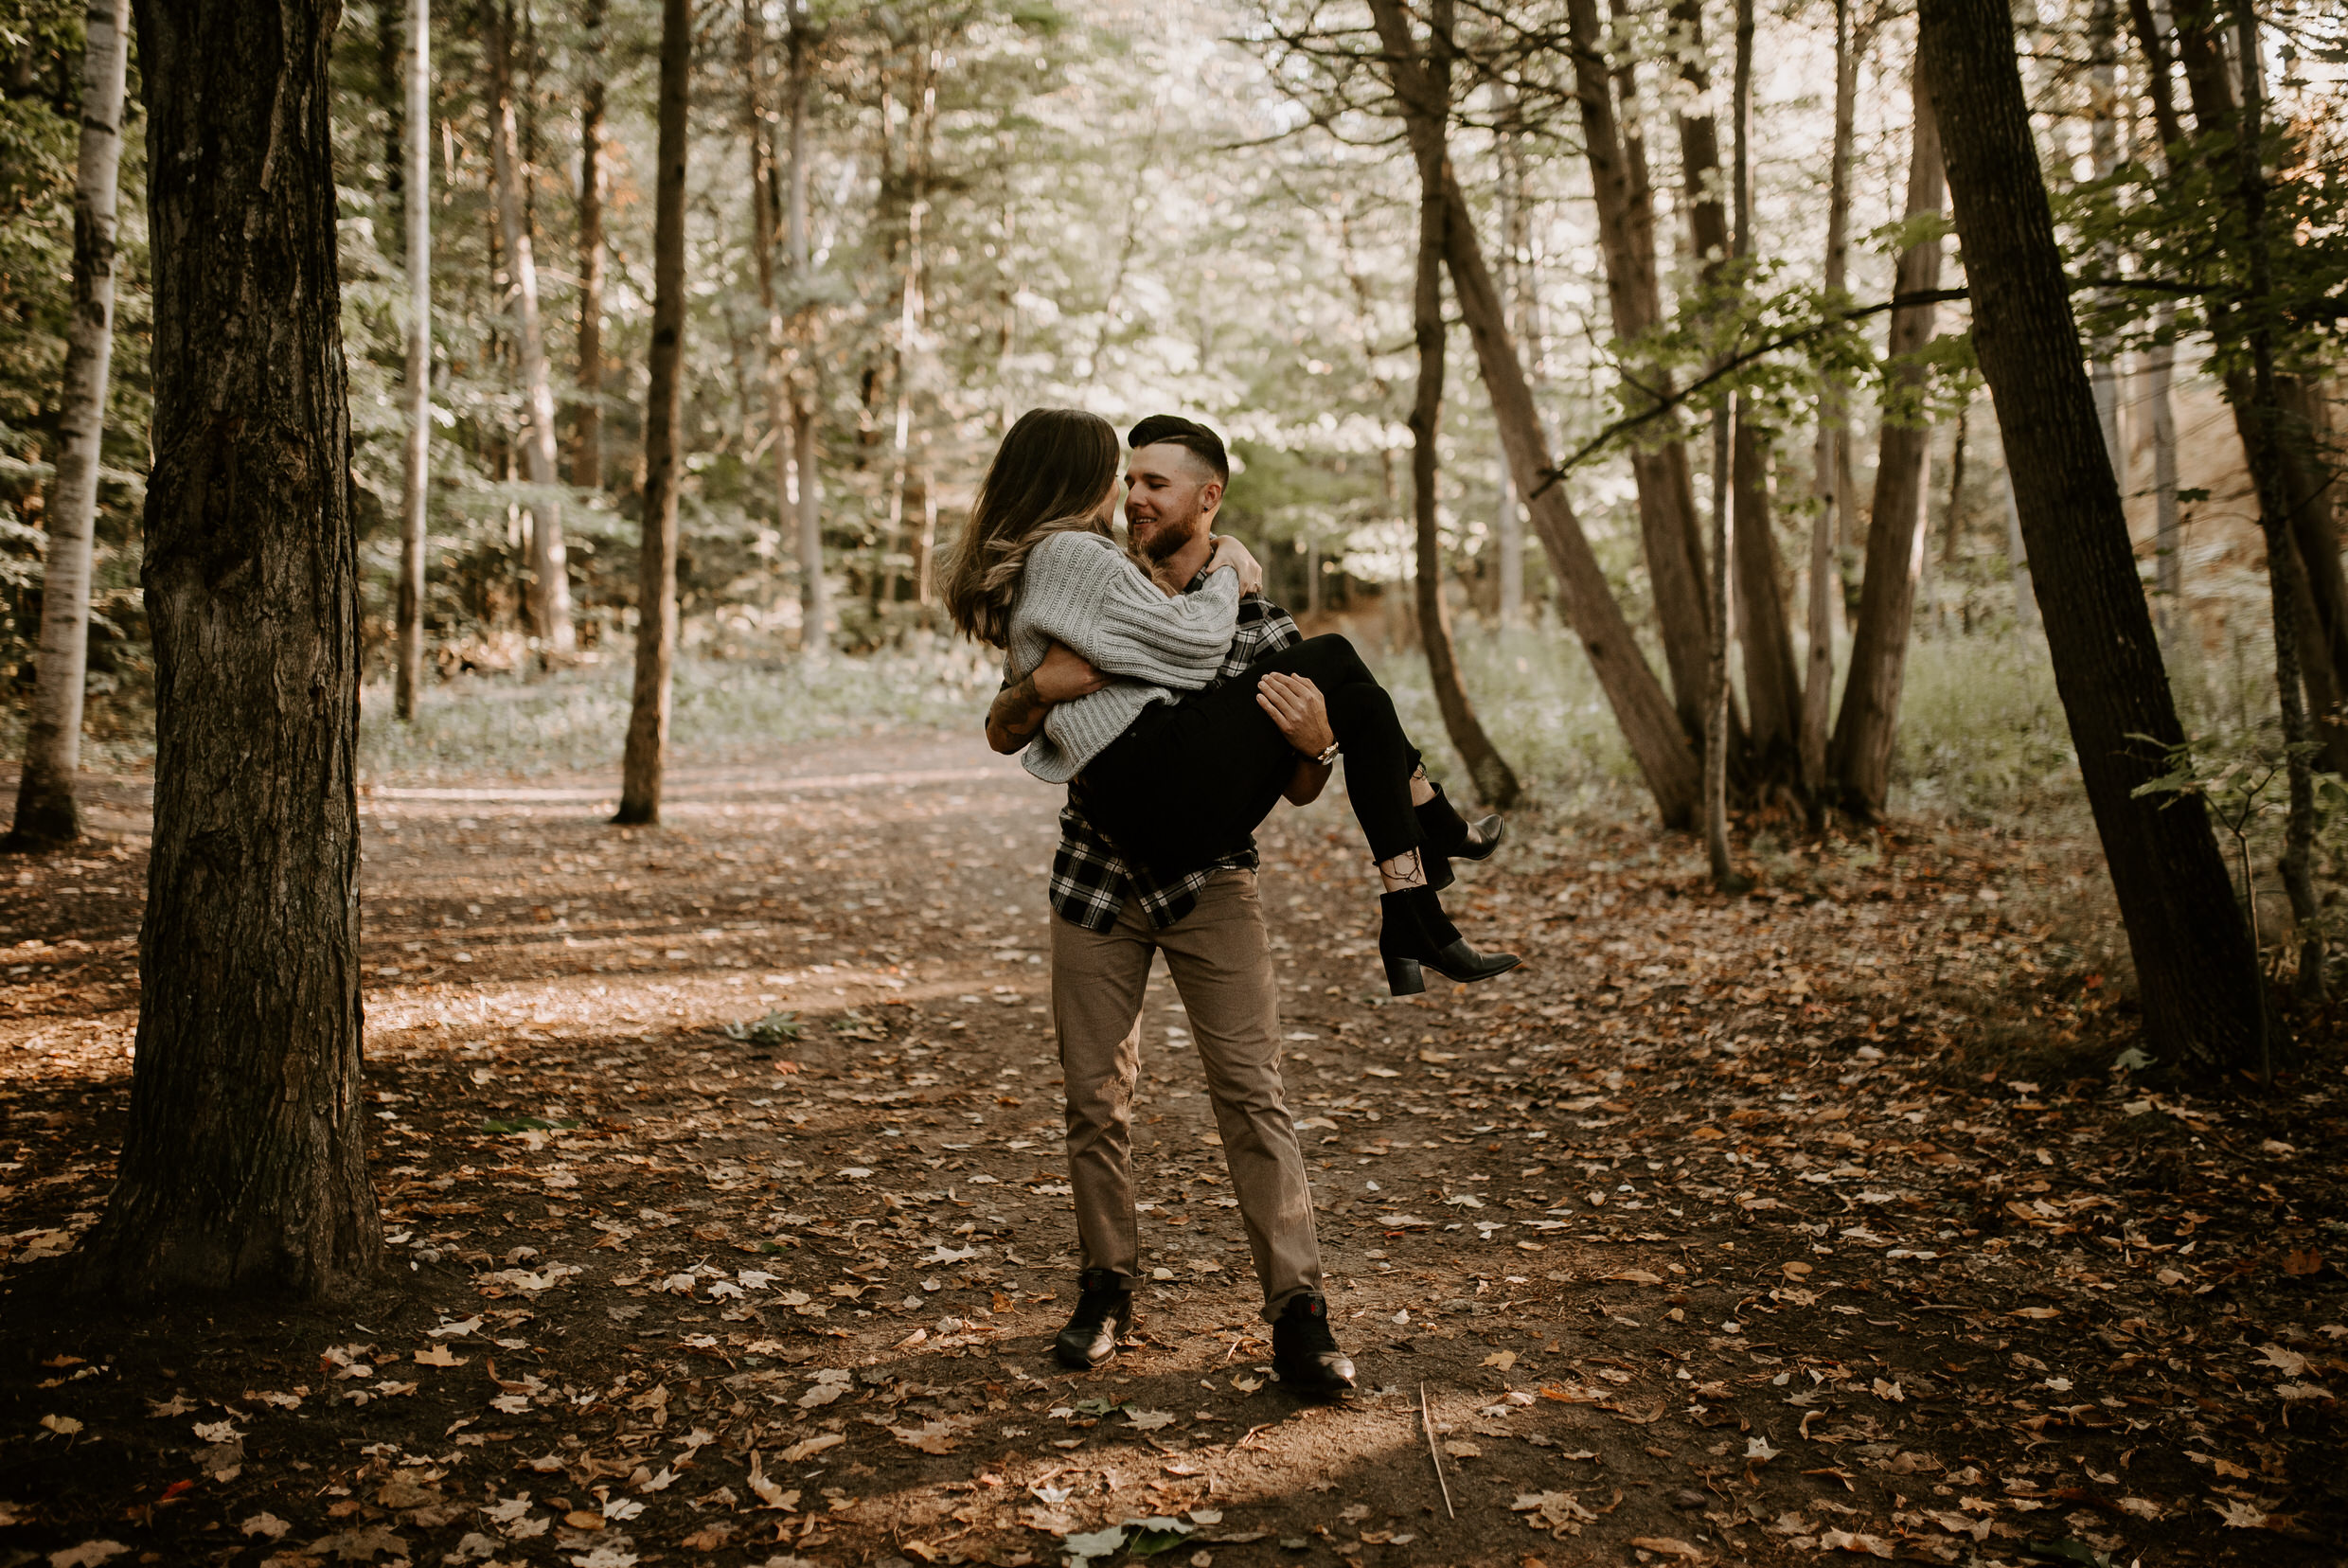 Muskoka Engagement Session - carried away in the forest